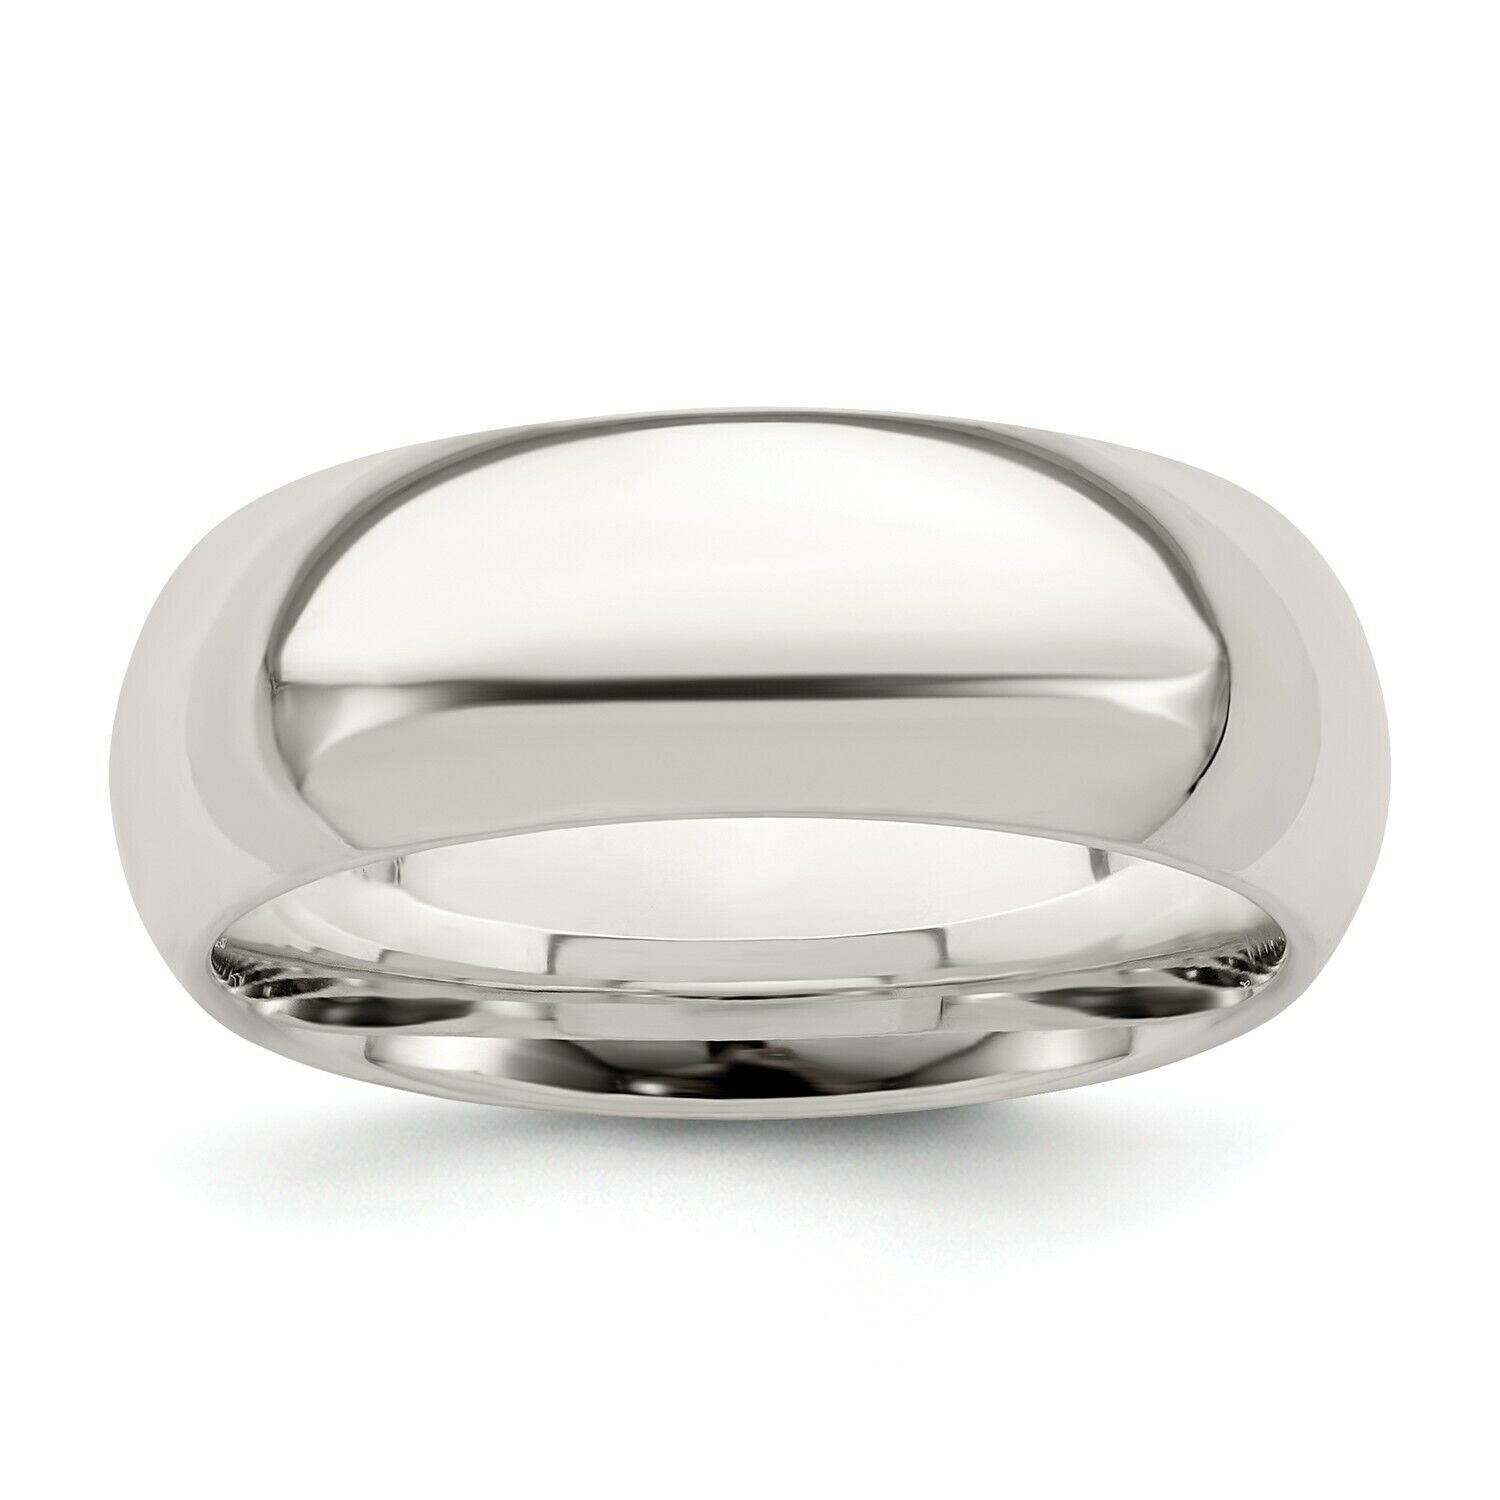 Sterling Silver Polished 7mm Comfort Fit Unisex Wedding Band Sizes 4 to 13.5 Najnowszy standard produktu